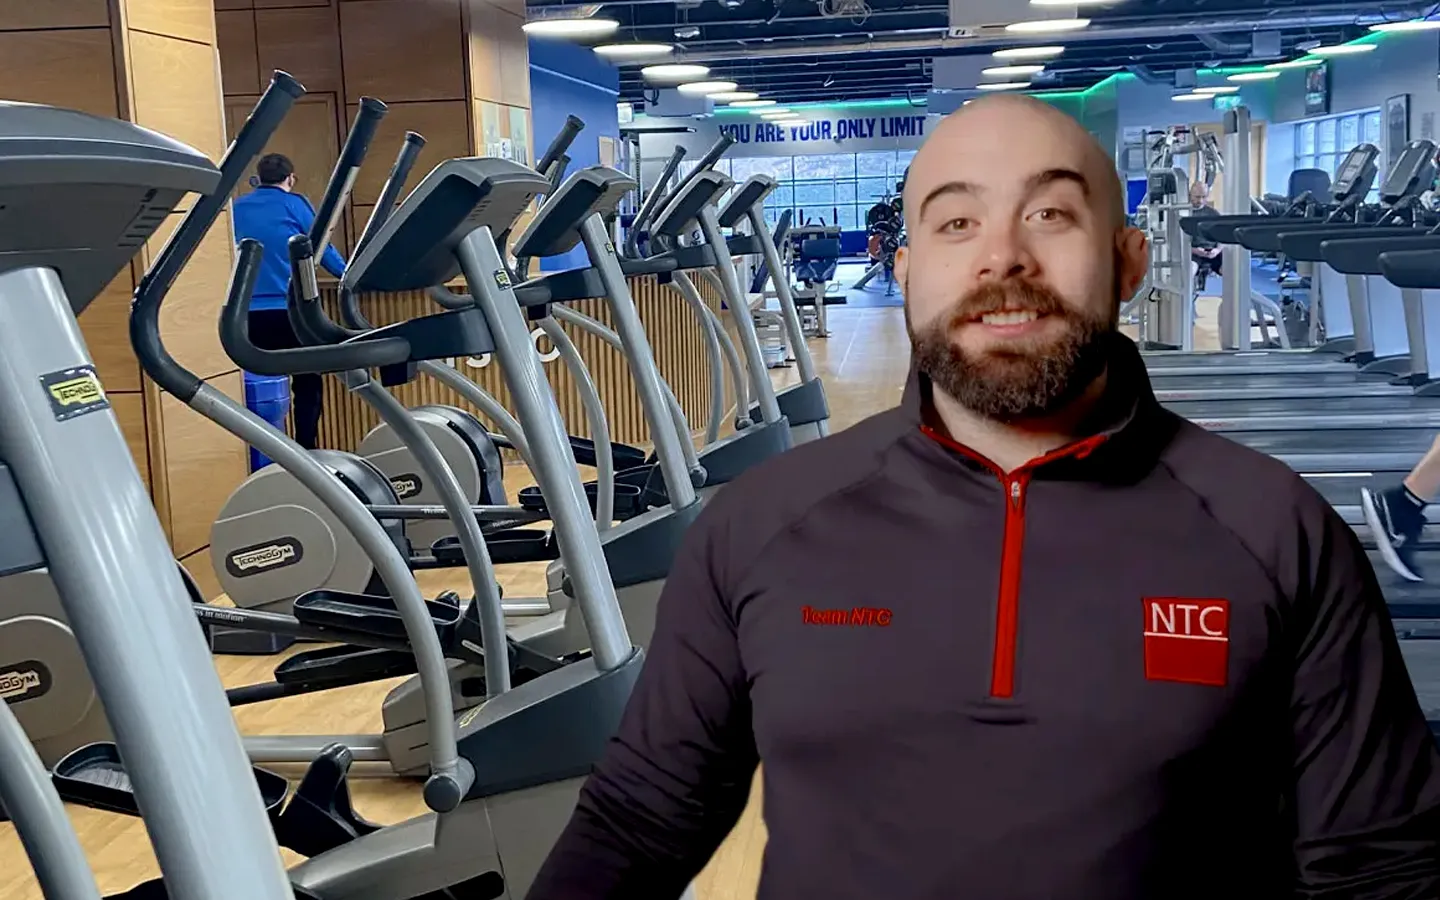 SPORTSCO announced as NTC’s new fitness host venue in south Dublin